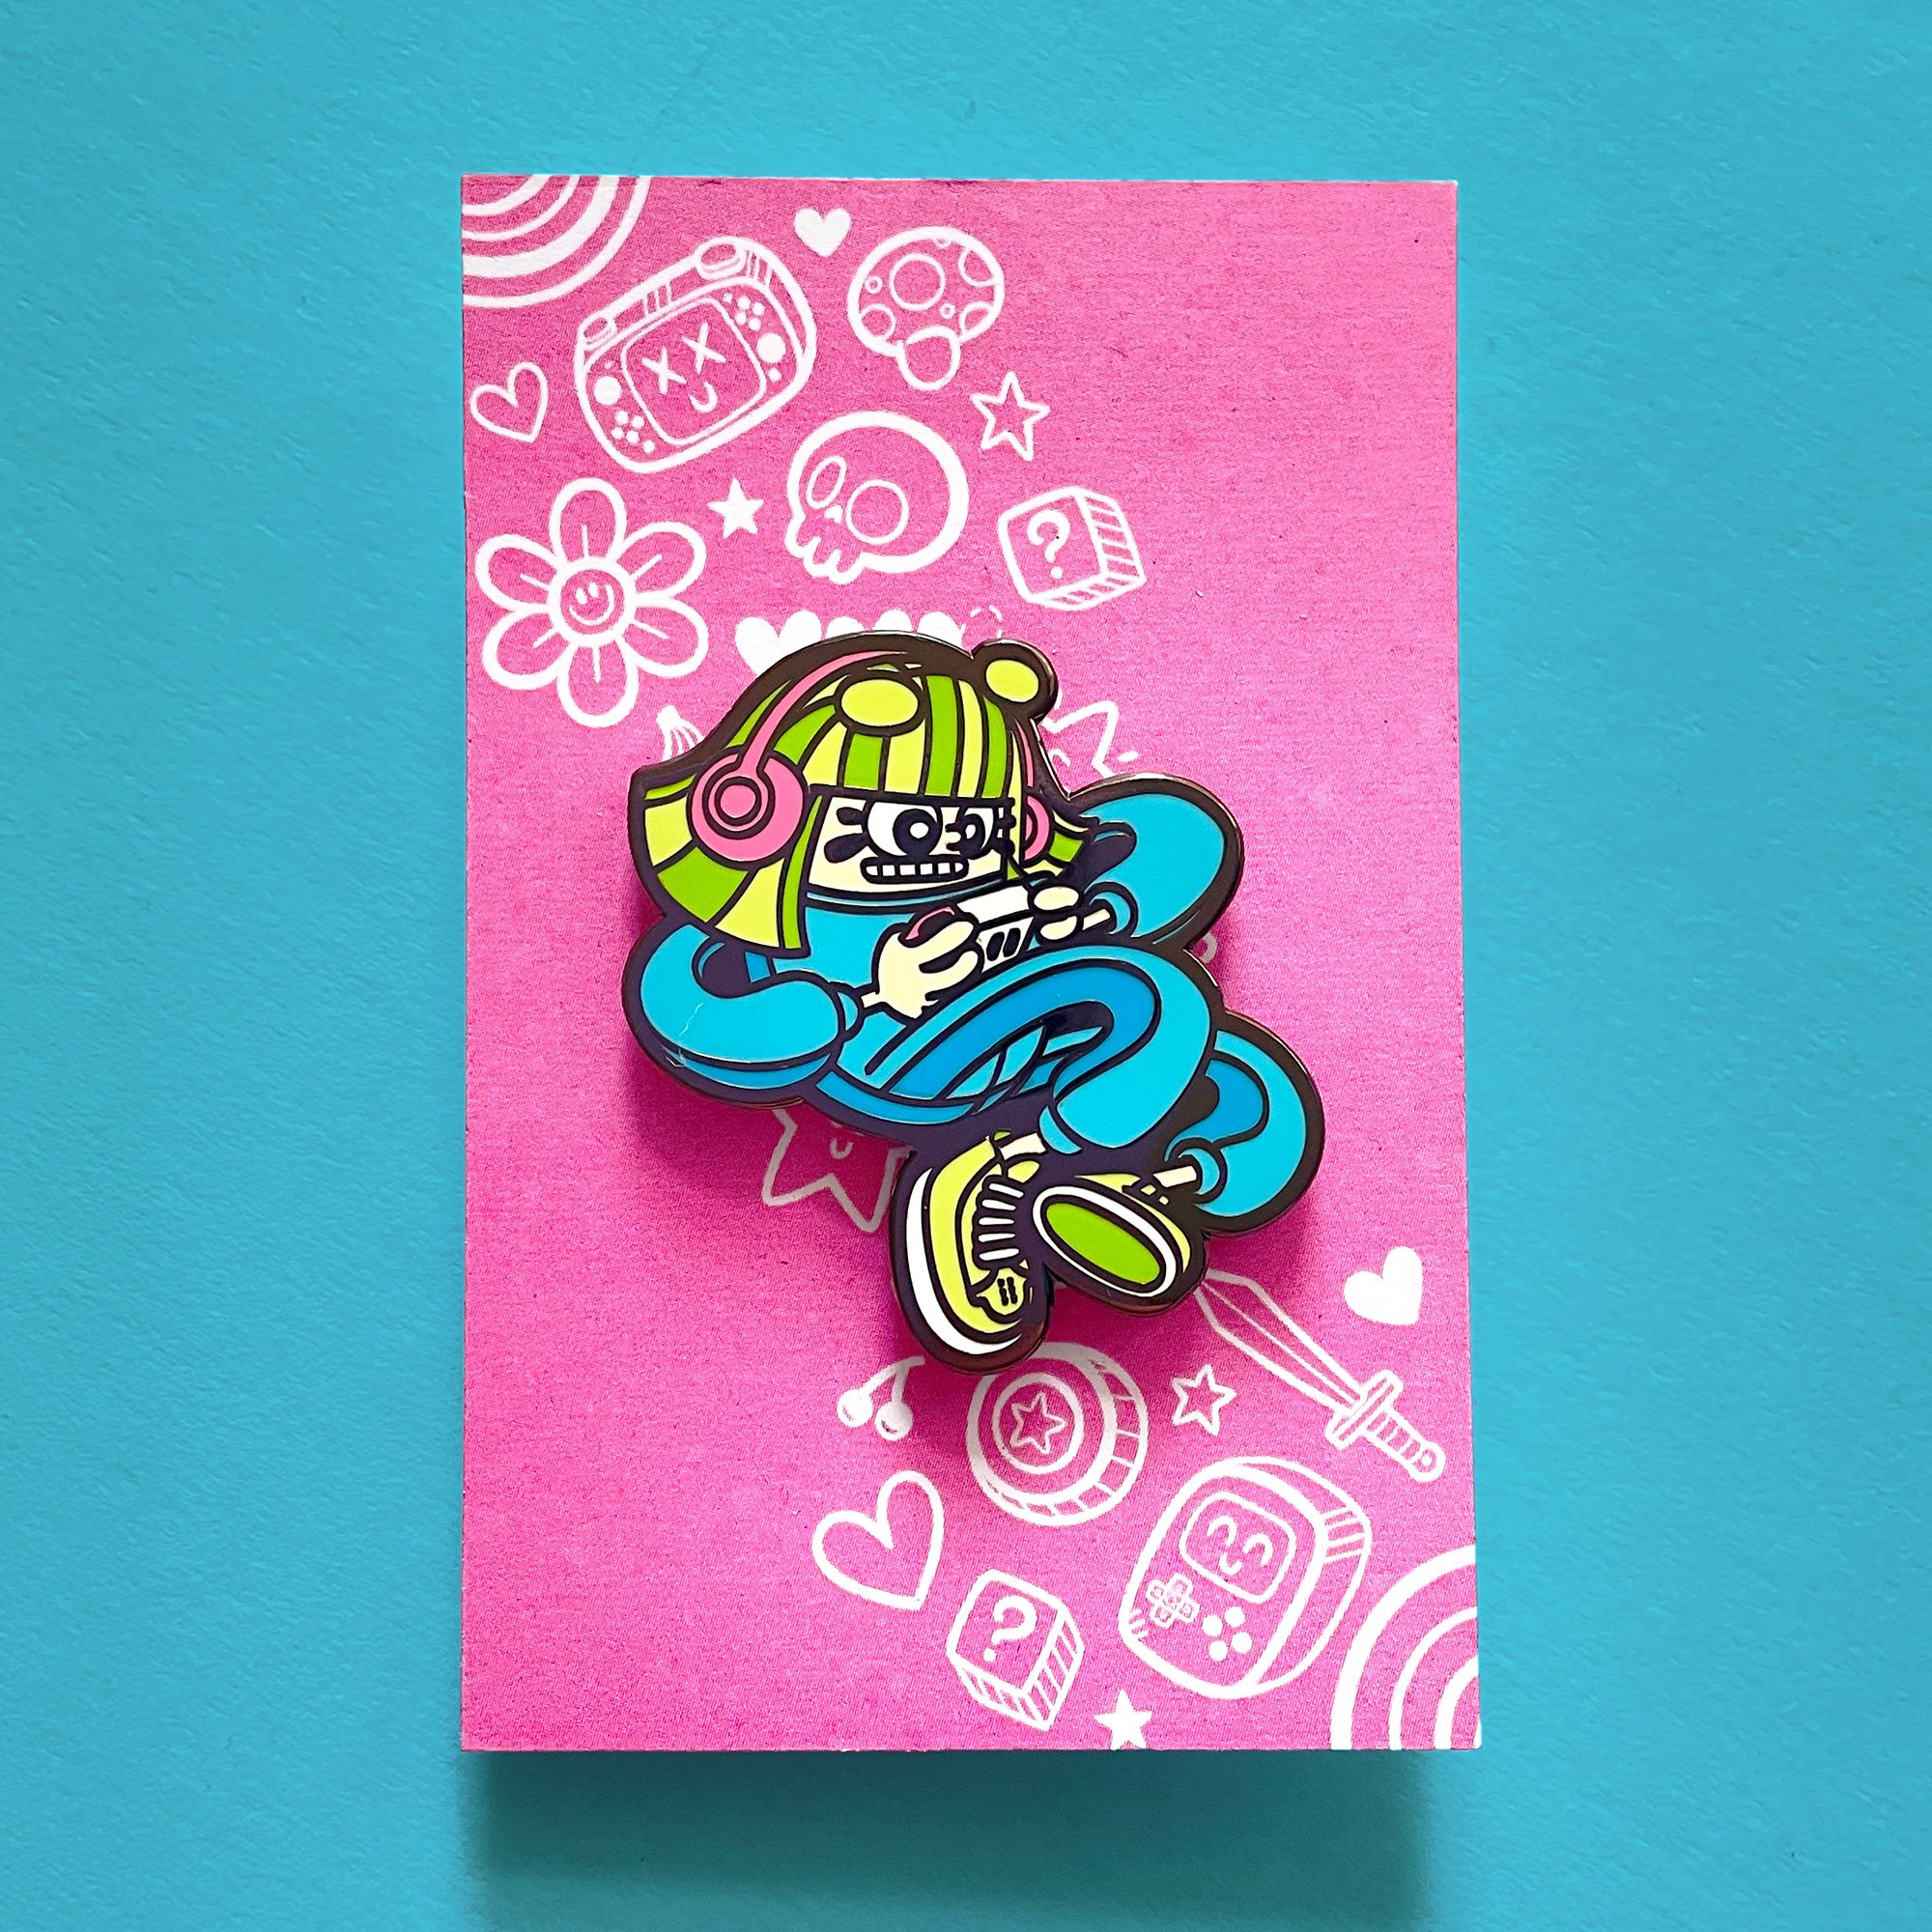 A photo of this Gamer Girl enamel pin on a pink backing card.